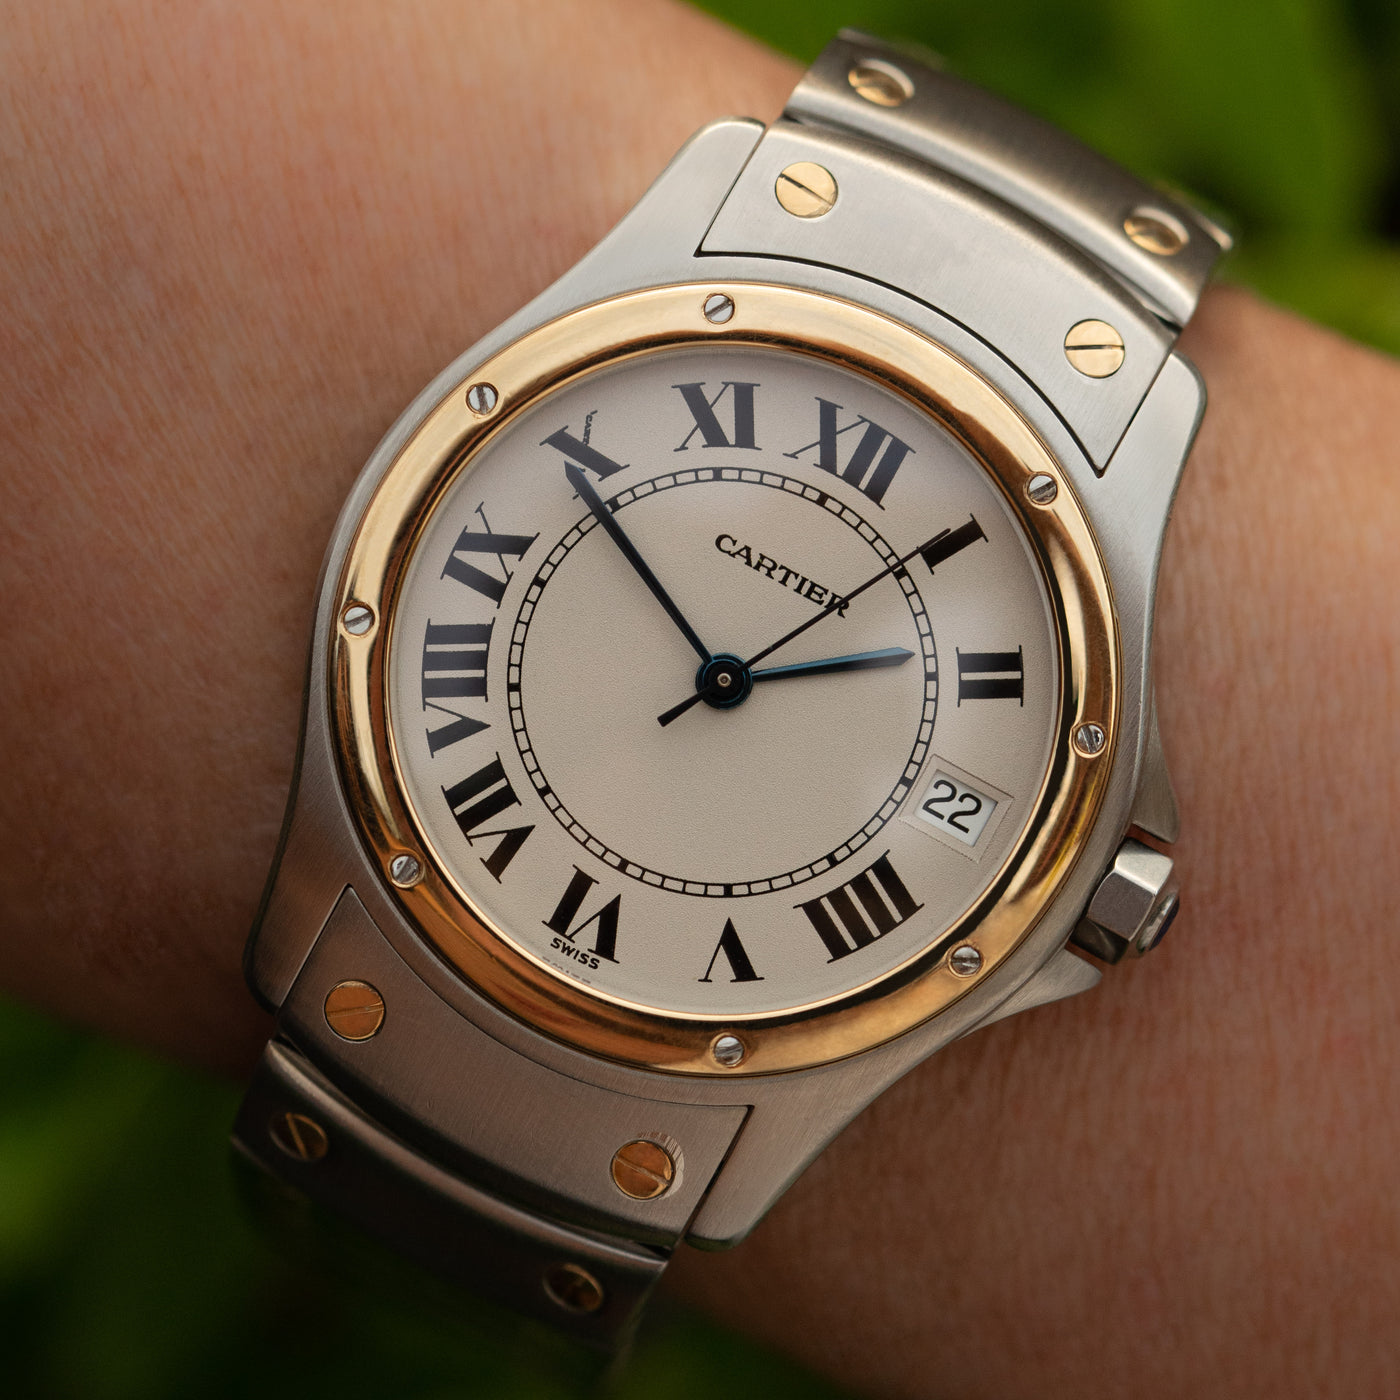 CARTIER SANTOS RONDE 18 KARAT YELLOW GOLD AND STAINLESS STEEL MODEL 1910